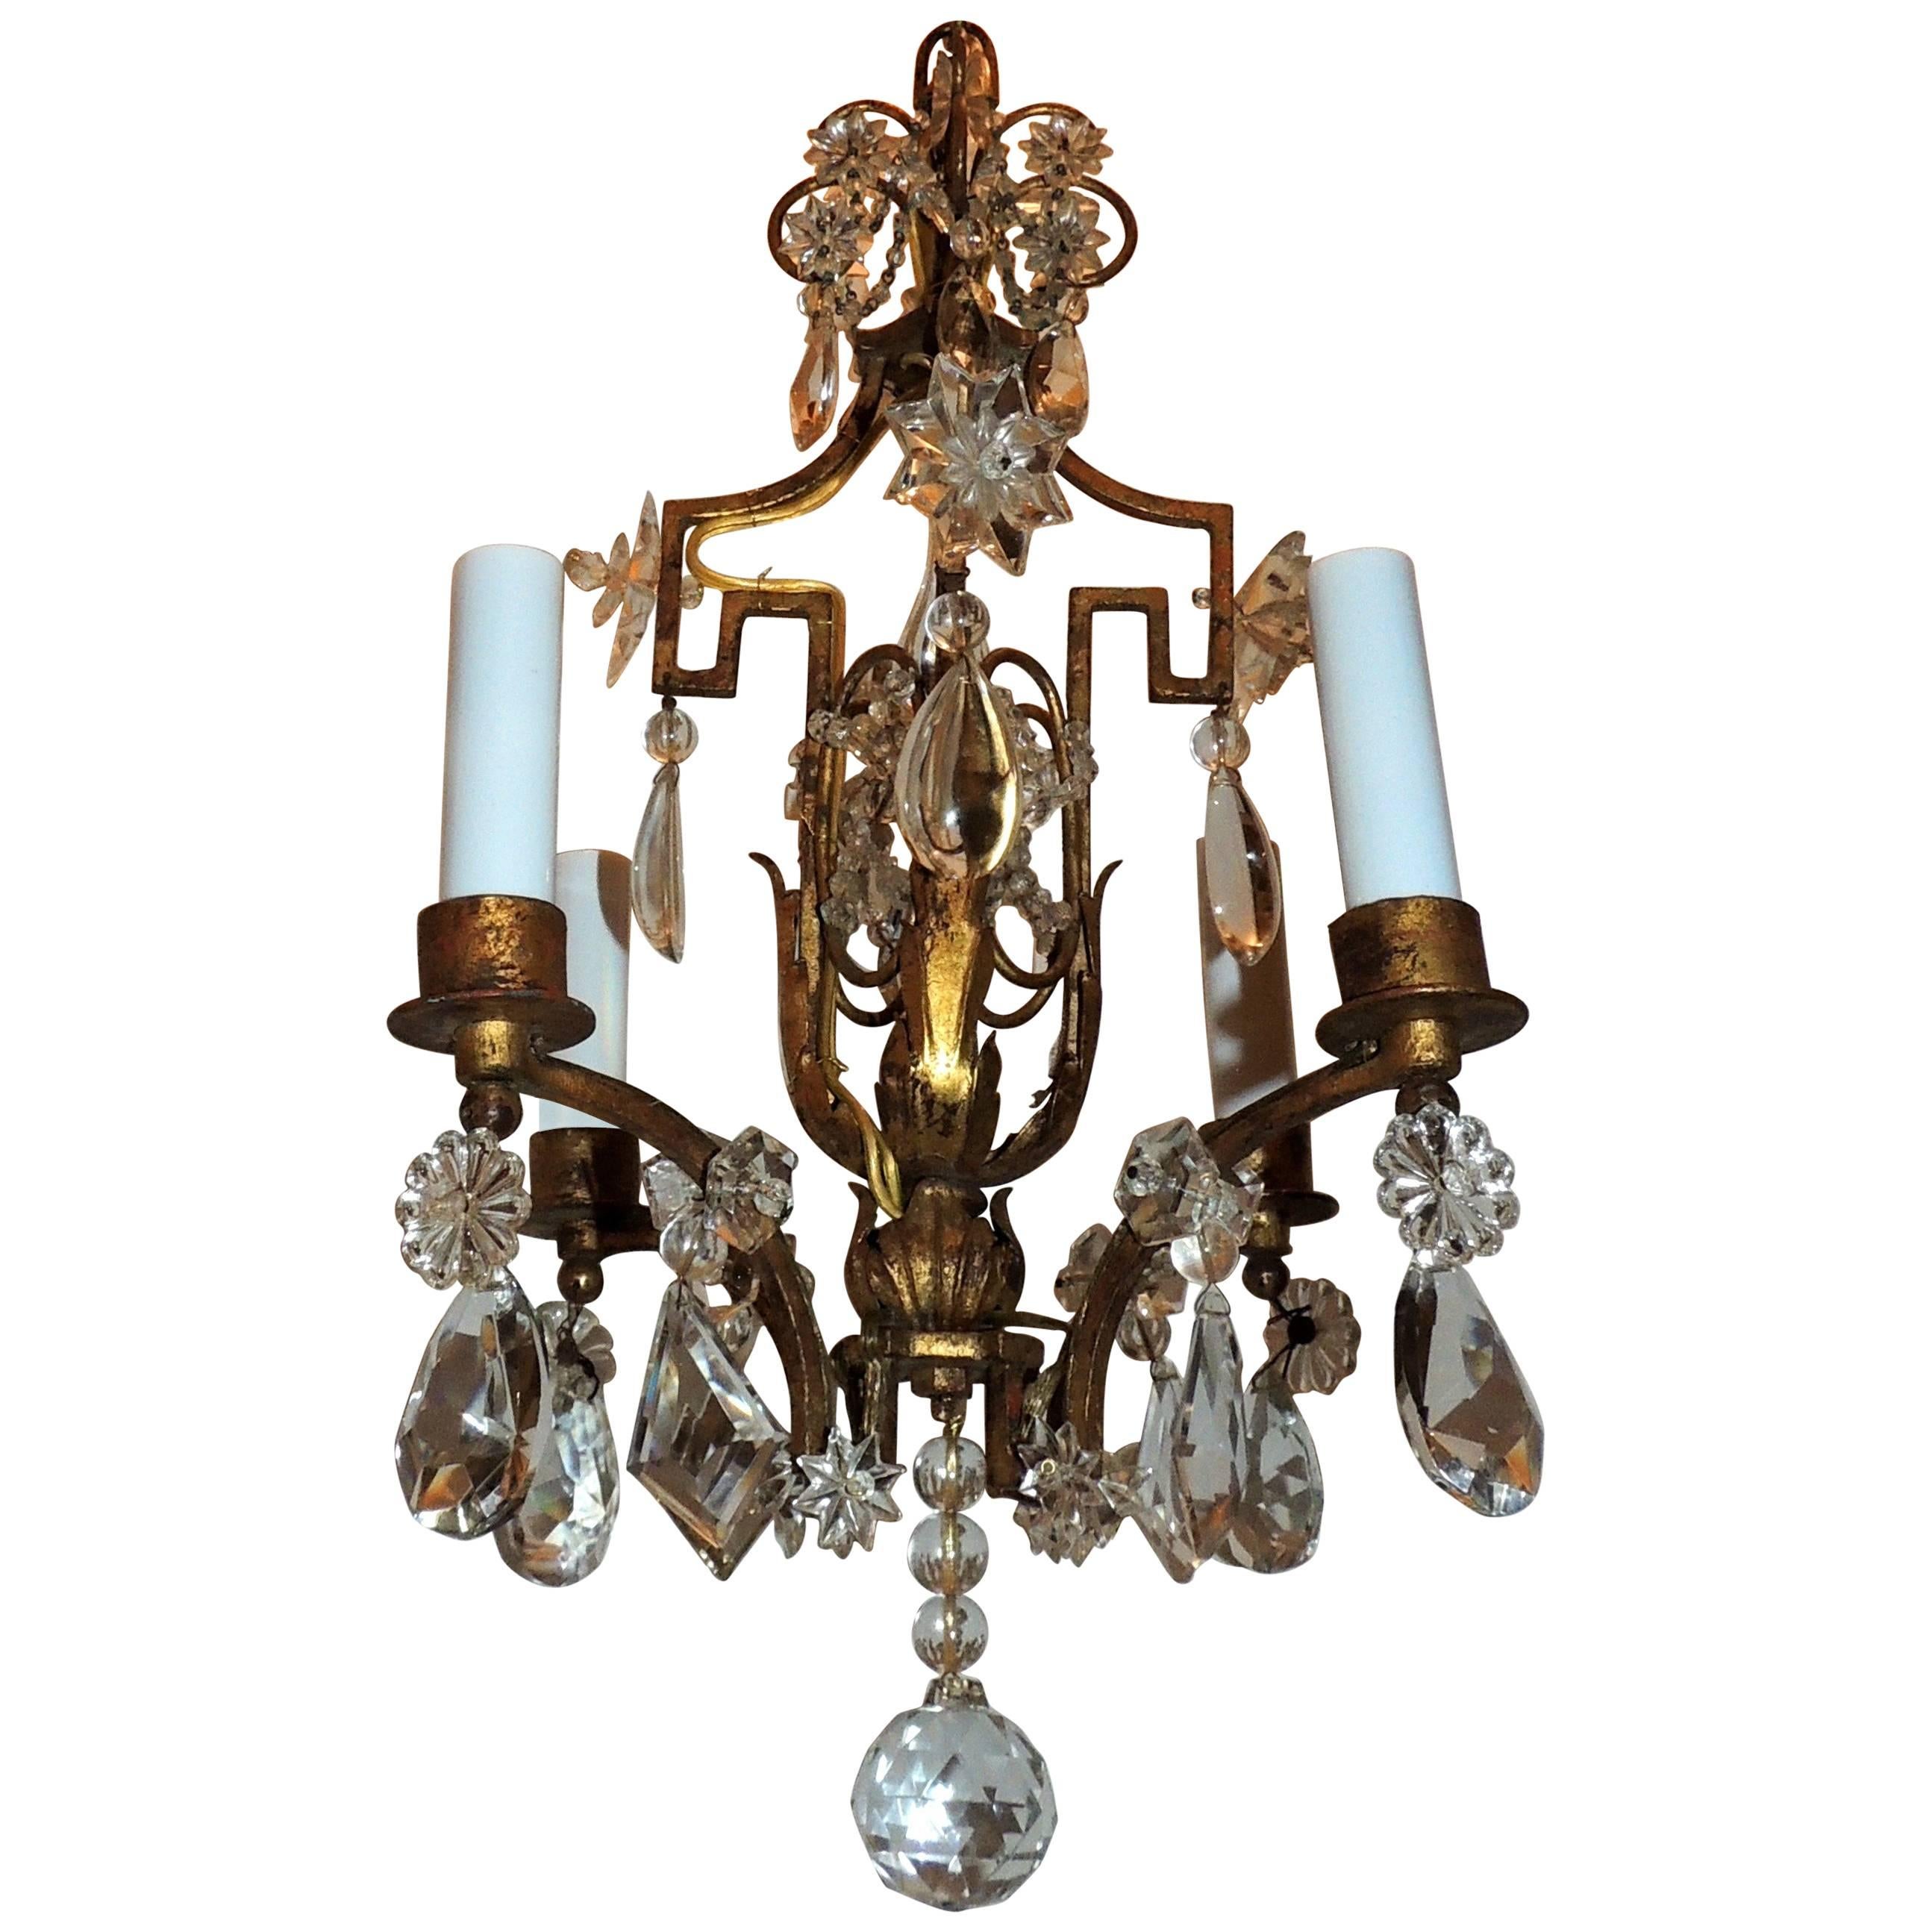 Wonderful Bagues French Gilt Crystal Beaded Petite Chandelier Four-Light Fixture